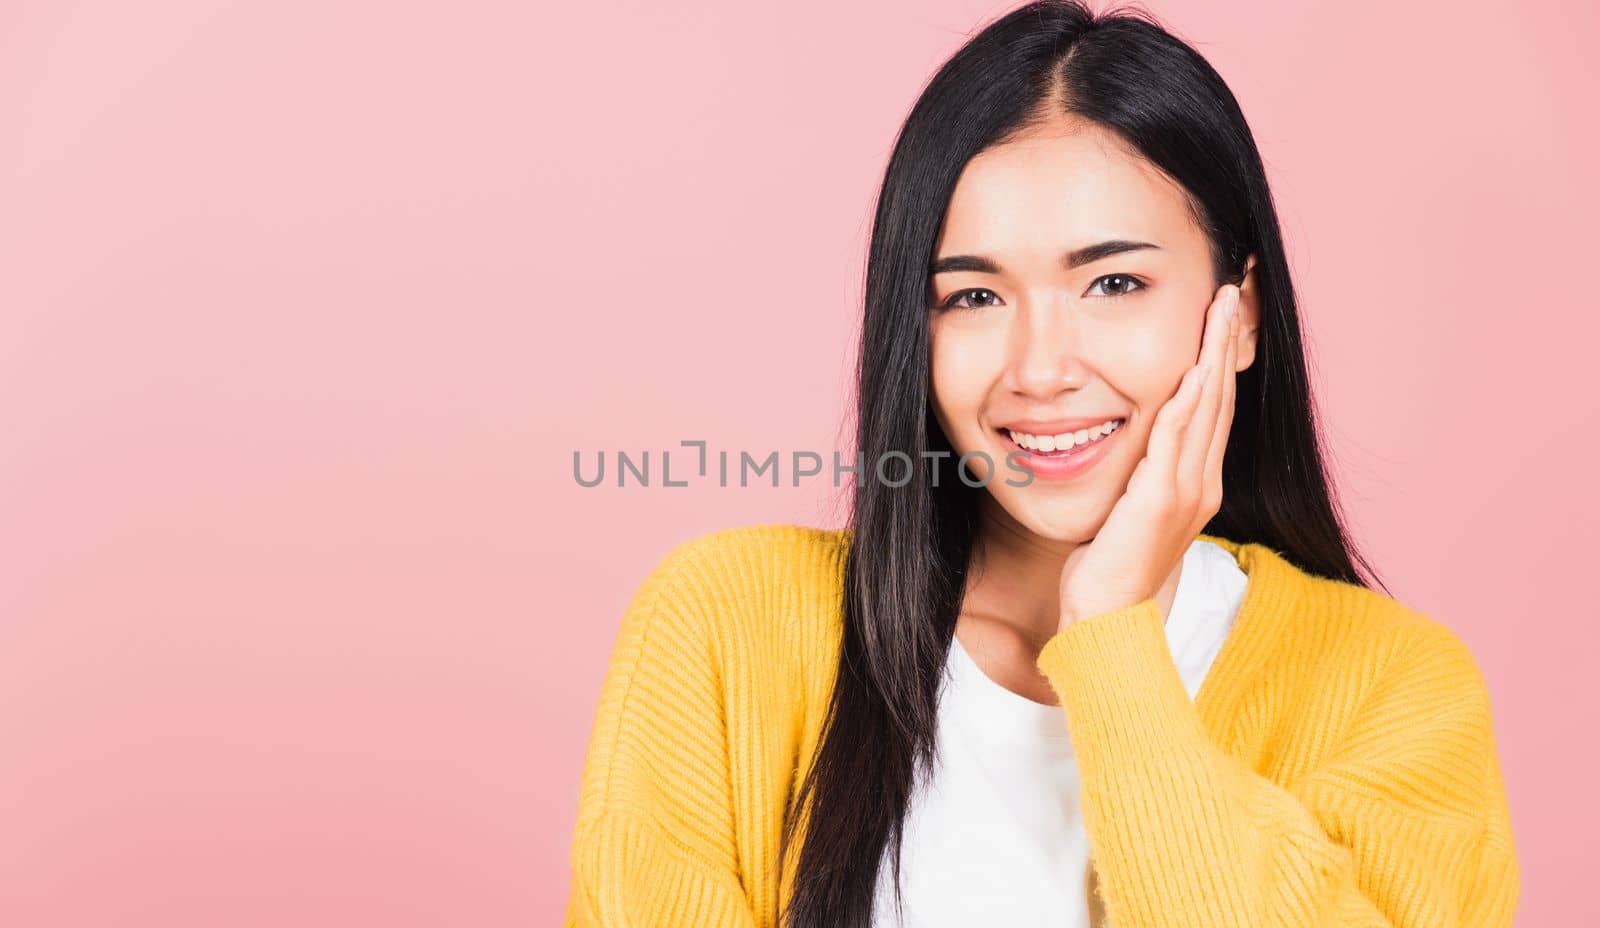 Happy Asian portrait beauty cute young woman teen smiling white teeth surprised excited celebrating gesturing palms on face studio shot isolated on pink background